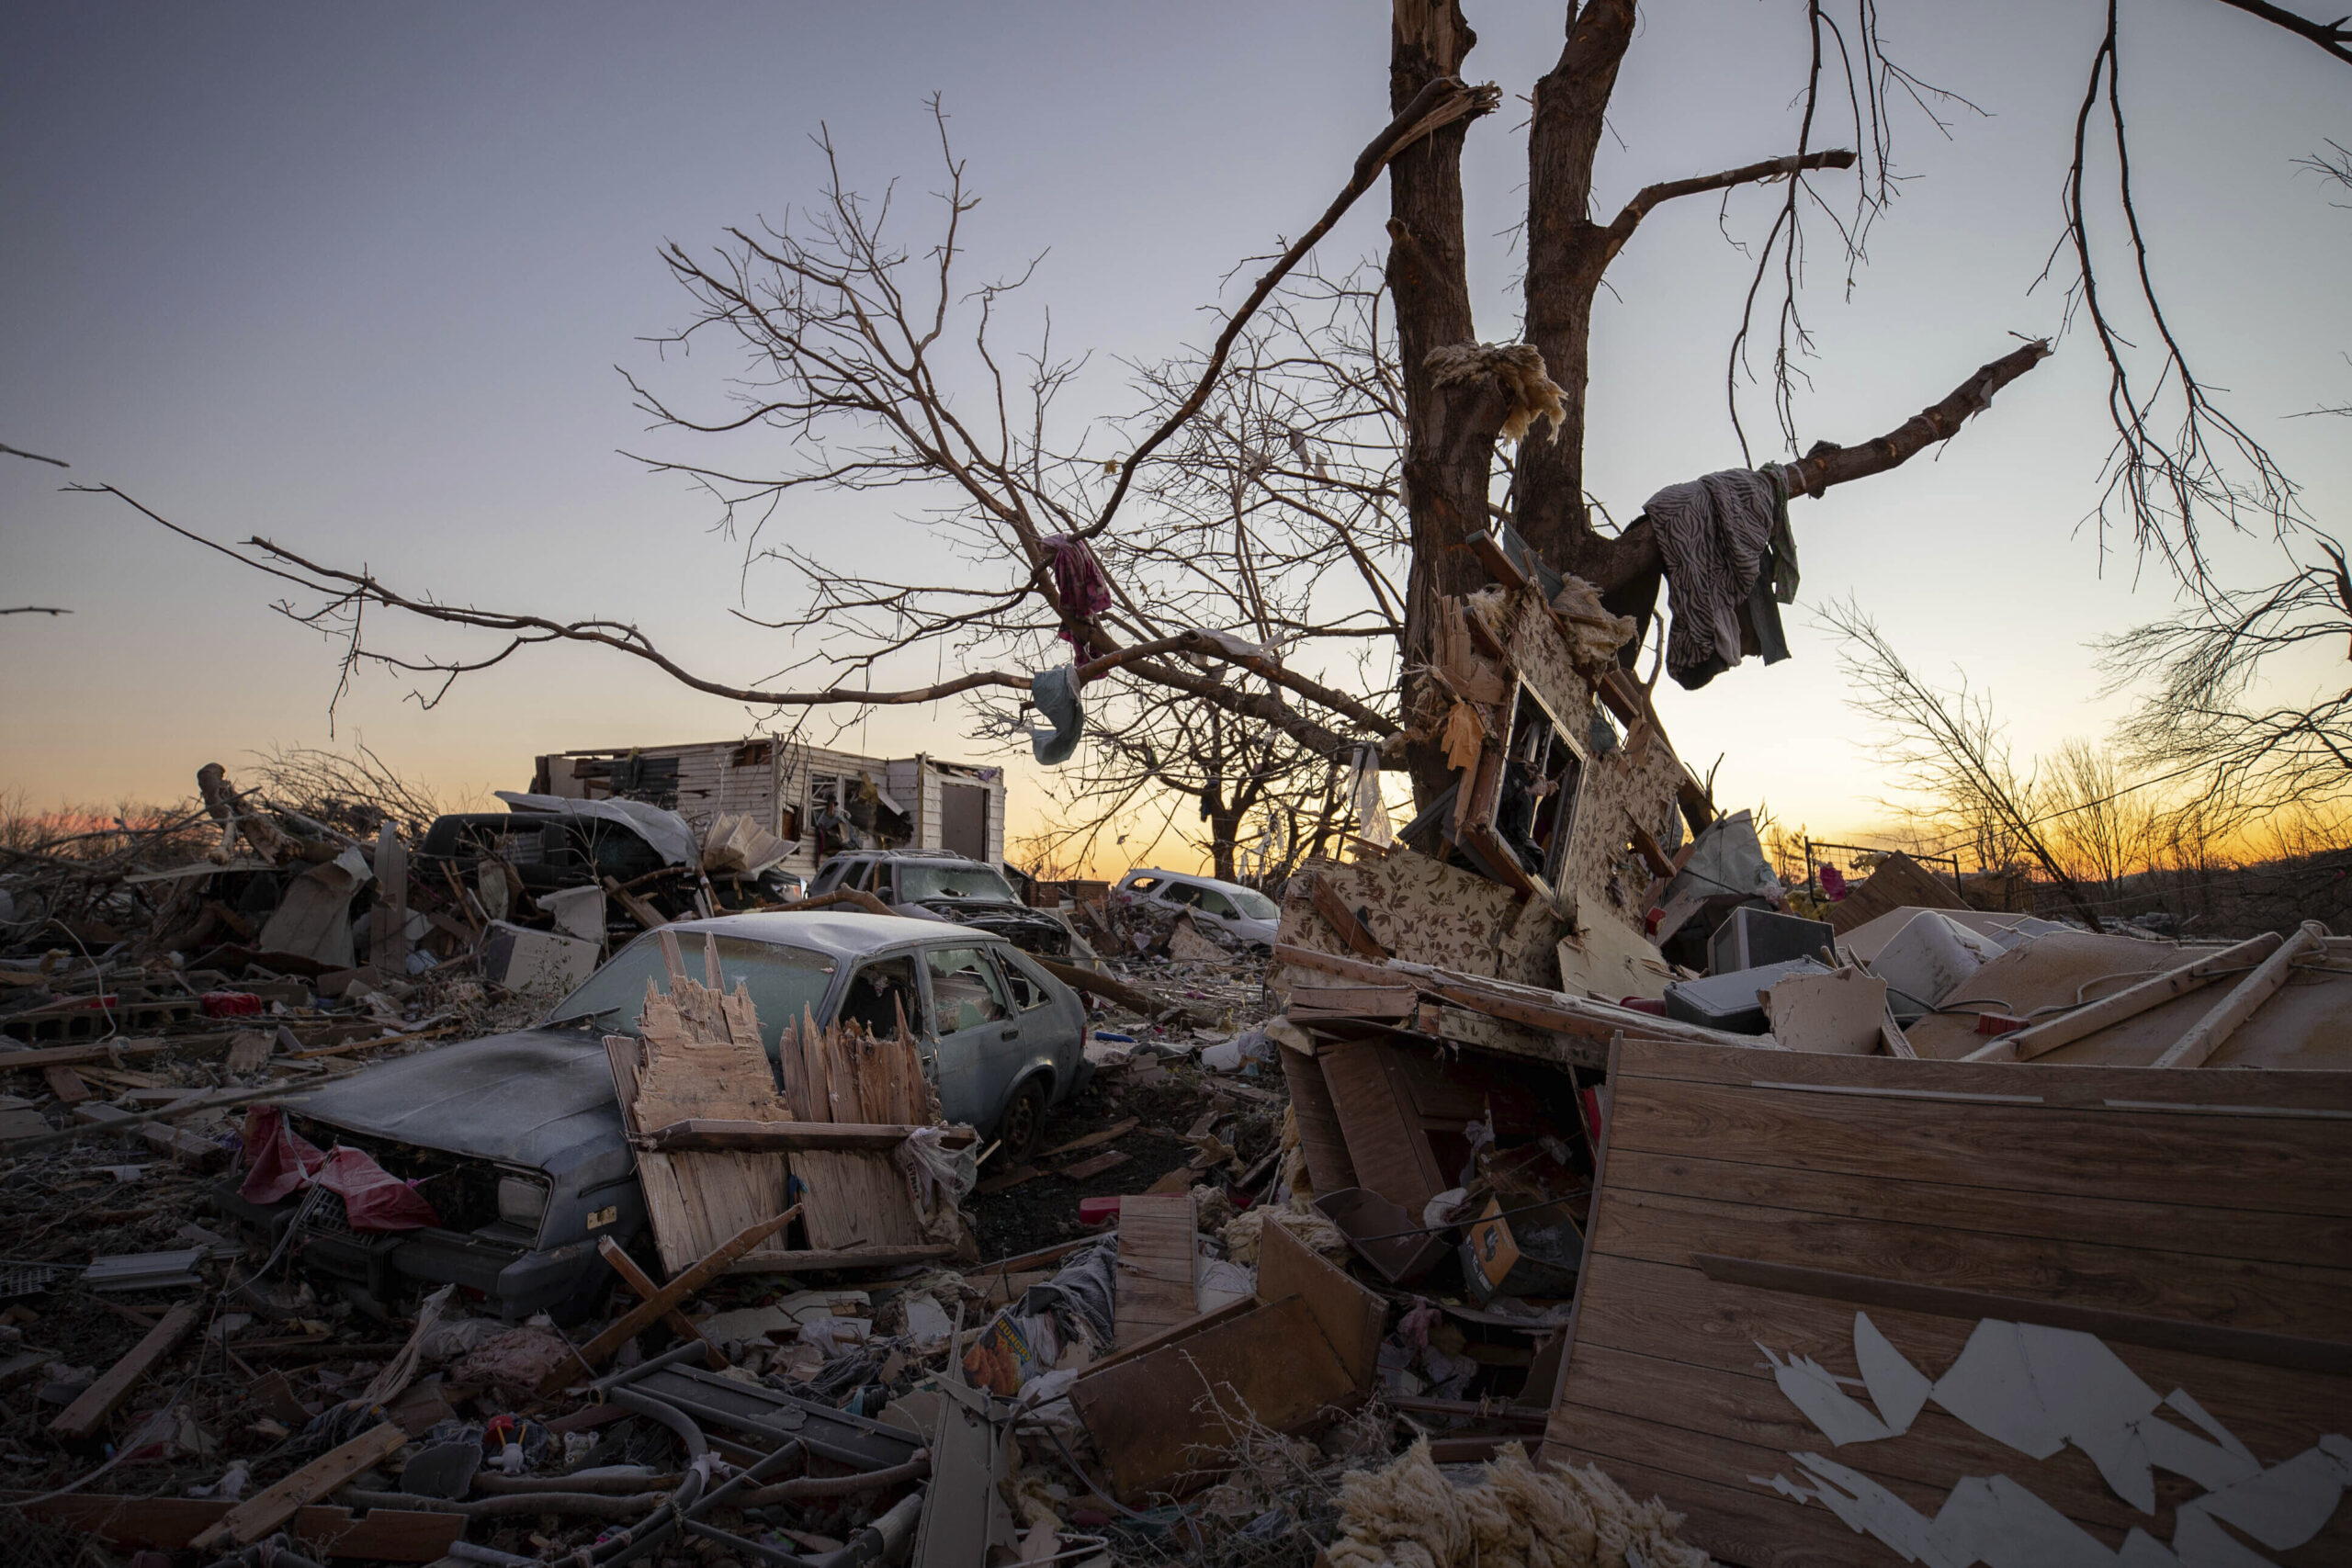 A car sits among the remains of a destroyed house after a tornado in Dawson Springs, Ky., Sunday, Dec. 12, 2021. A monstrous tornado, carving a track that could rival the longest on record, ripped across the middle of the U.S. on Friday. (AP Photo/Michael Clubb)